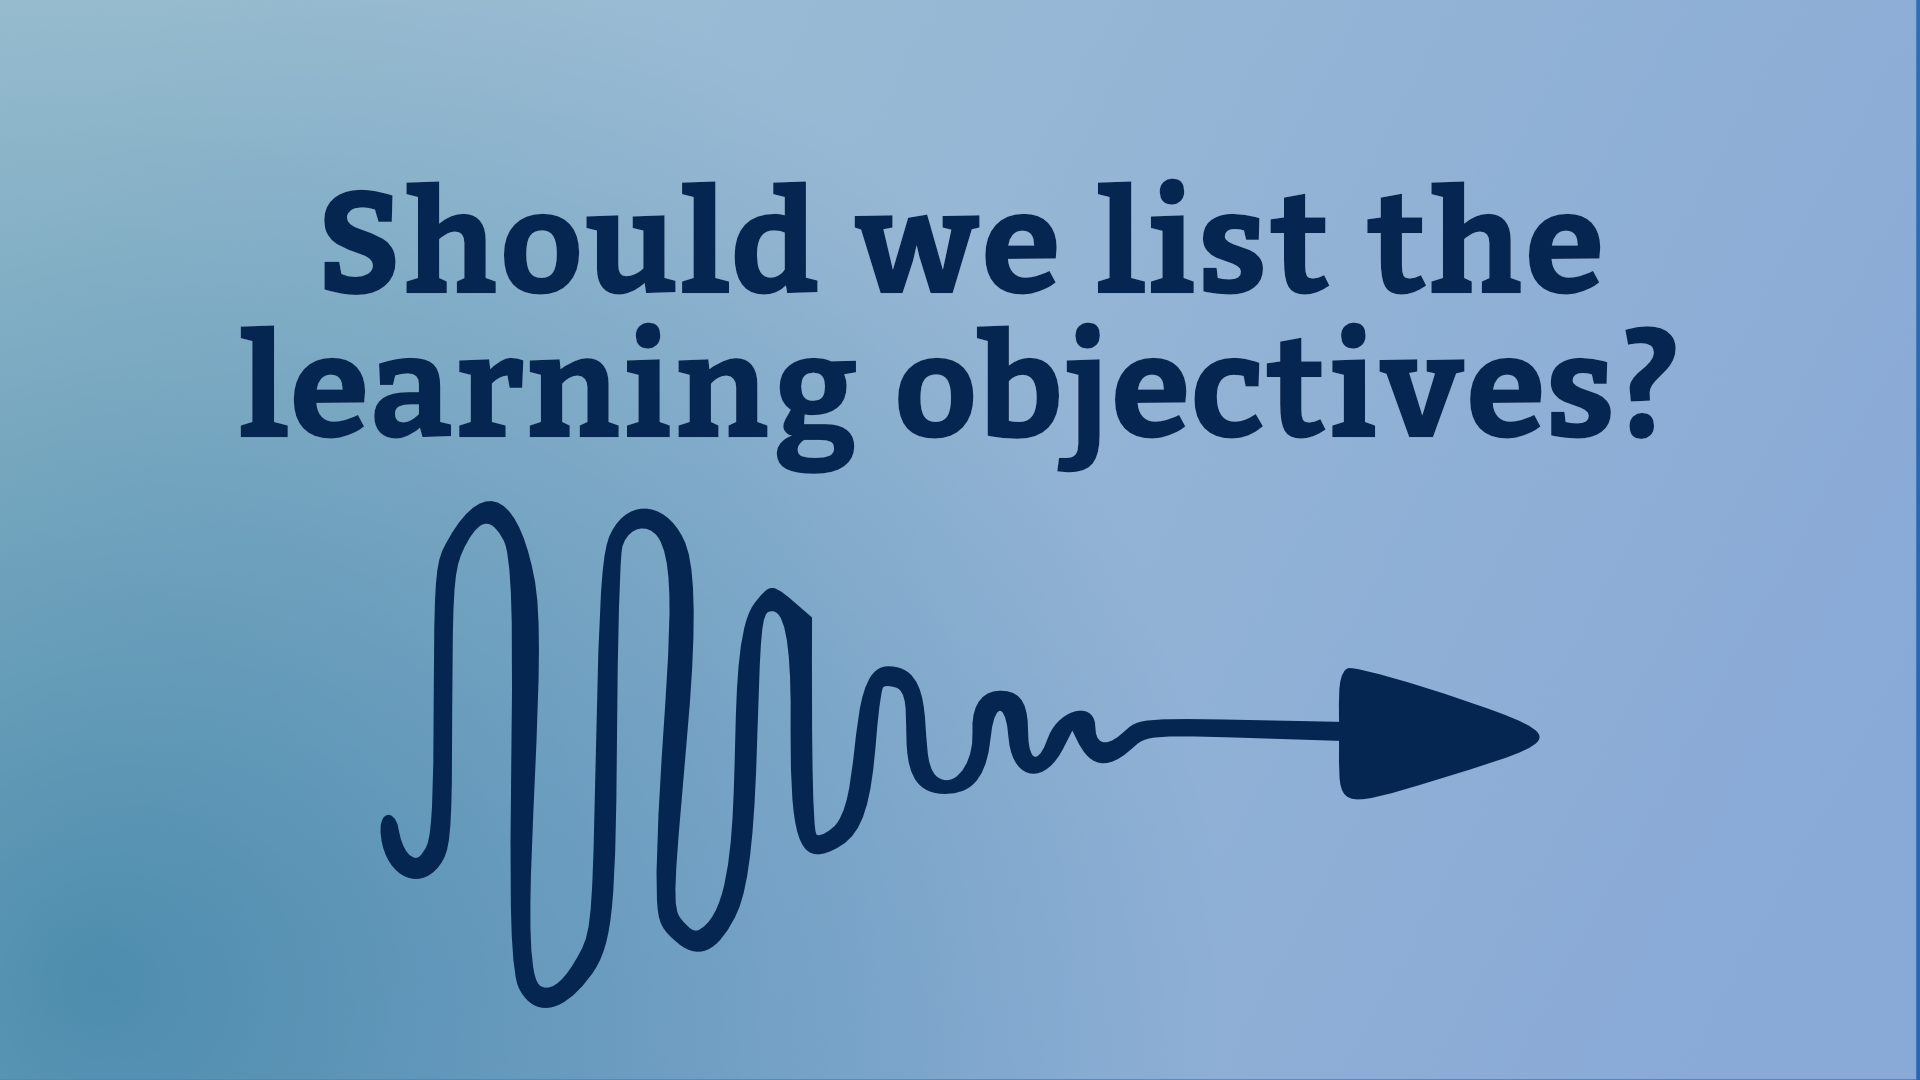 Should we list the learning objectives? Hand drawn arrow starts from a wavy line on the left to an arrow point on the right.